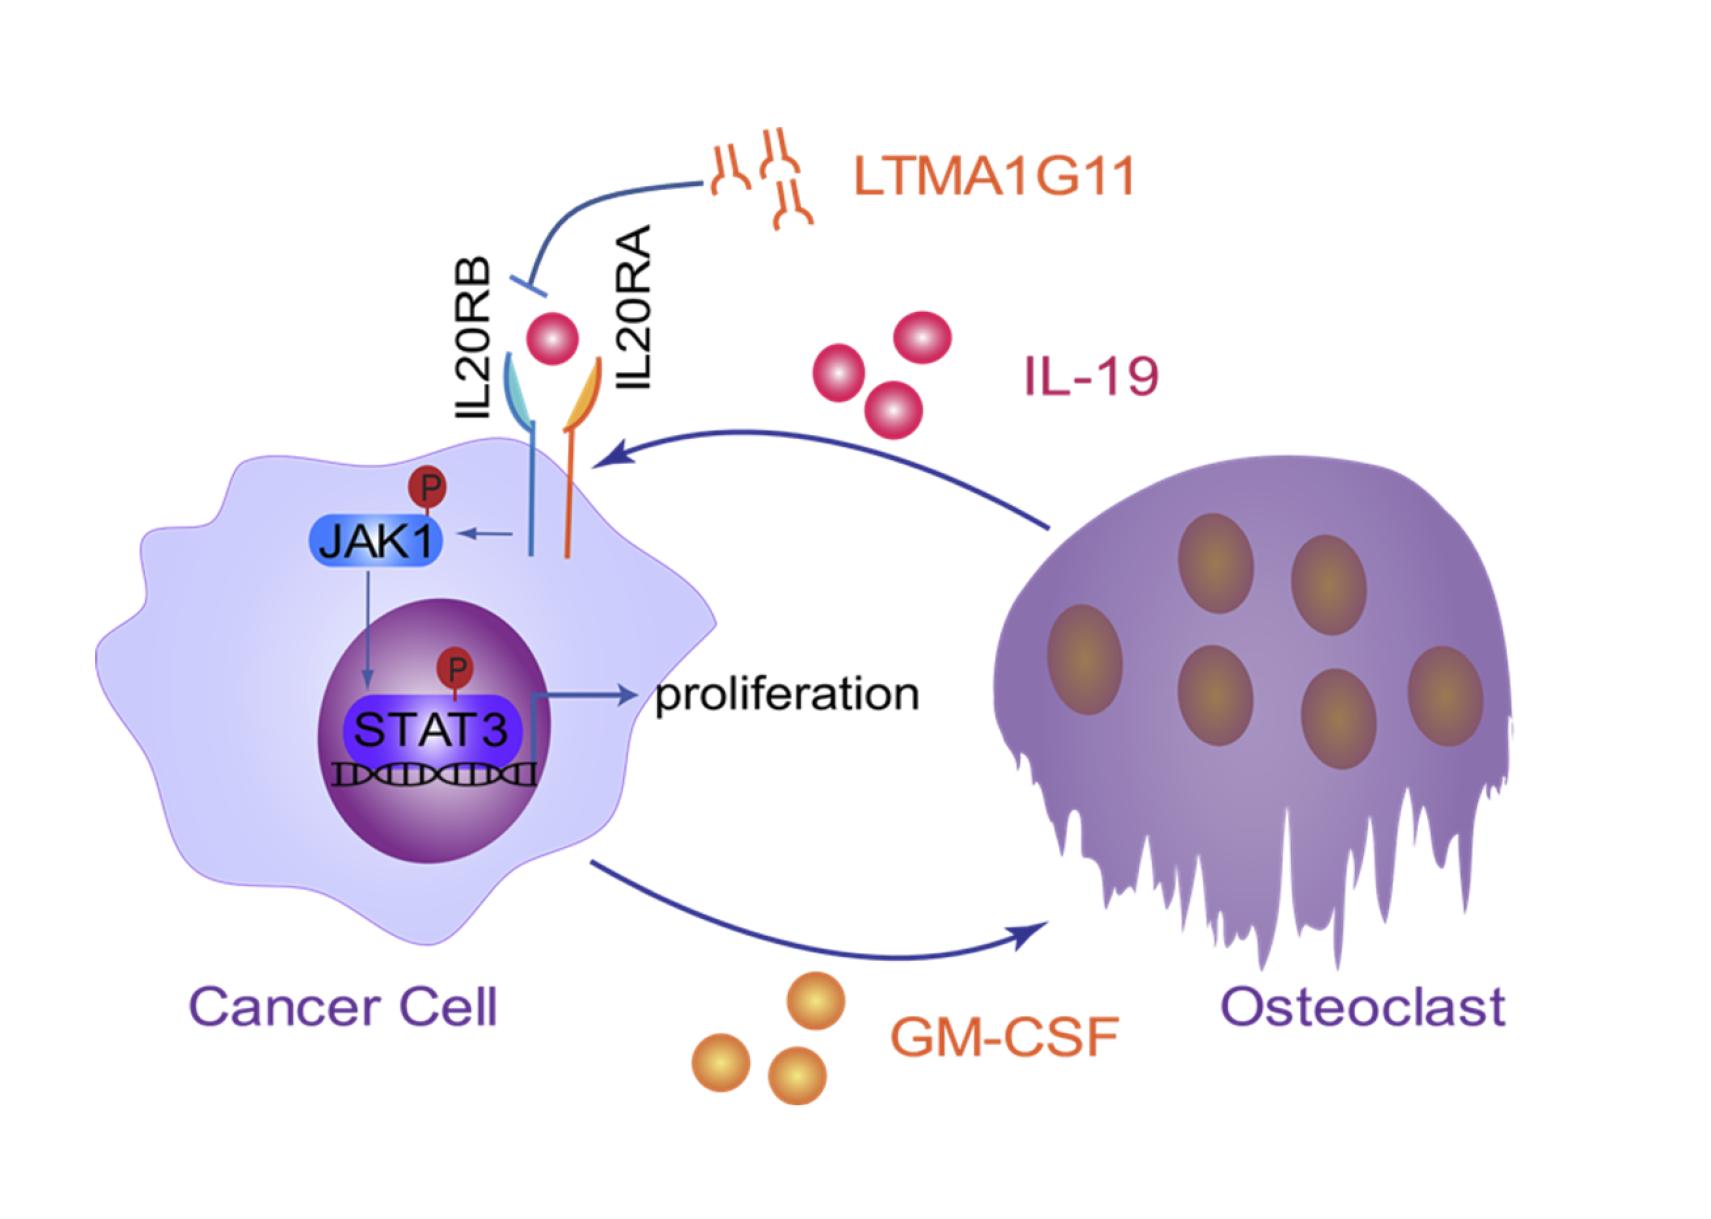 Researchers Reveal Mechanism of Direct Osteoclast-to-Tumor Stimulus for Lung Cancer Bone Metastasis